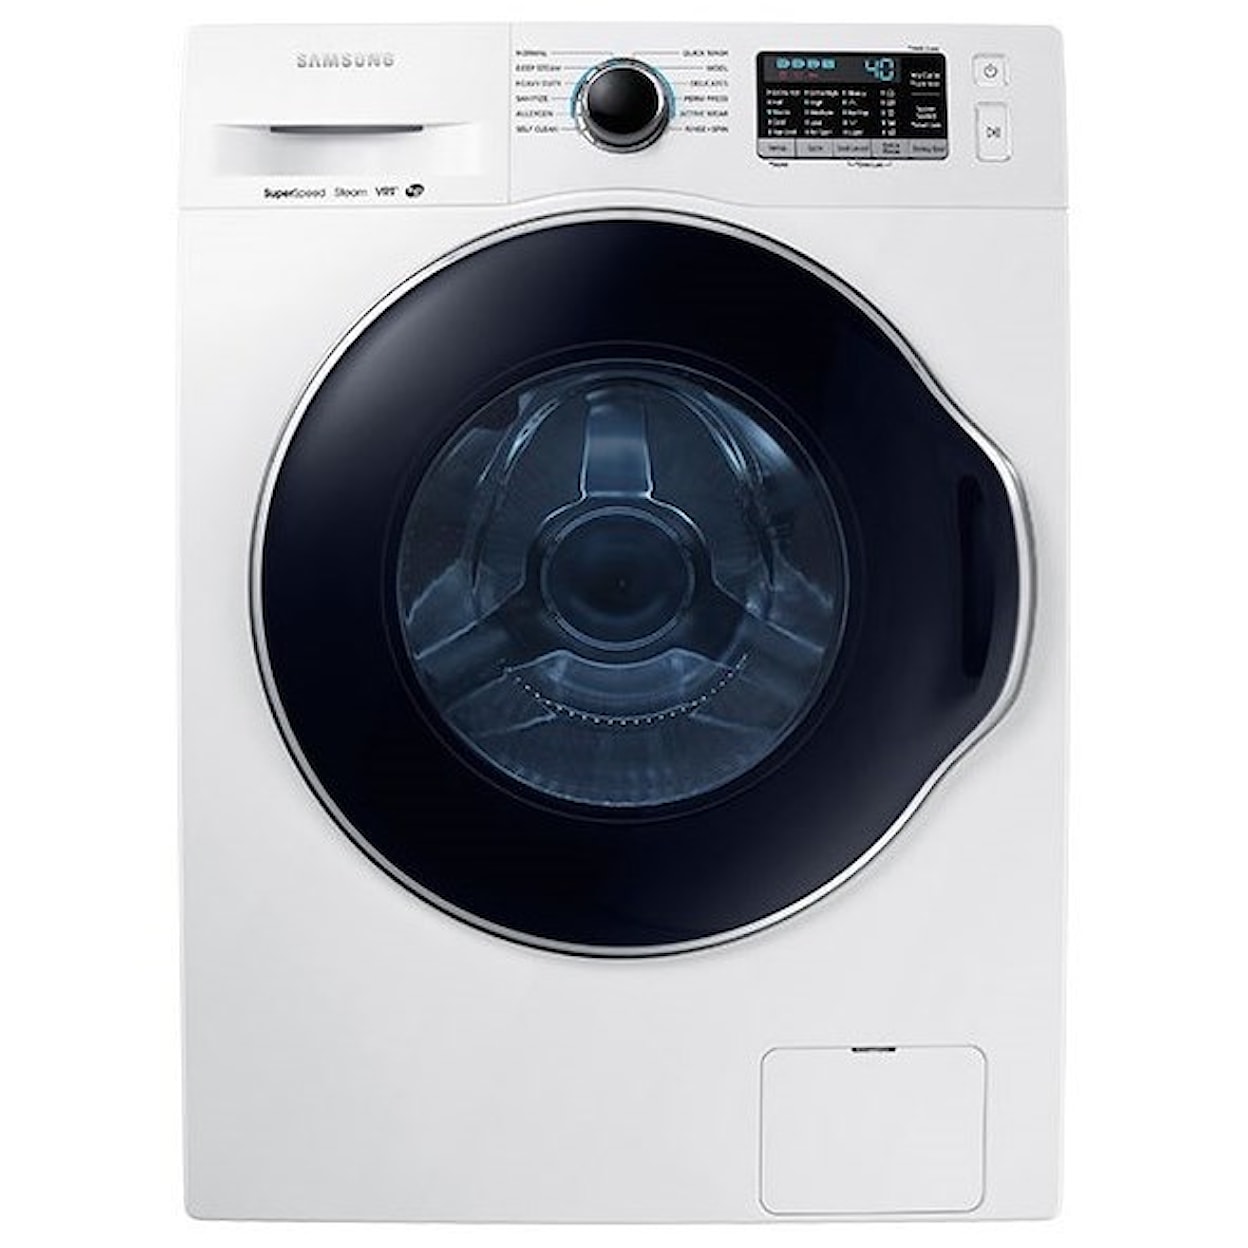 Samsung Appliances Front Load Washers - Samsung WW6800 2.2 cu. ft. Front Load Washer